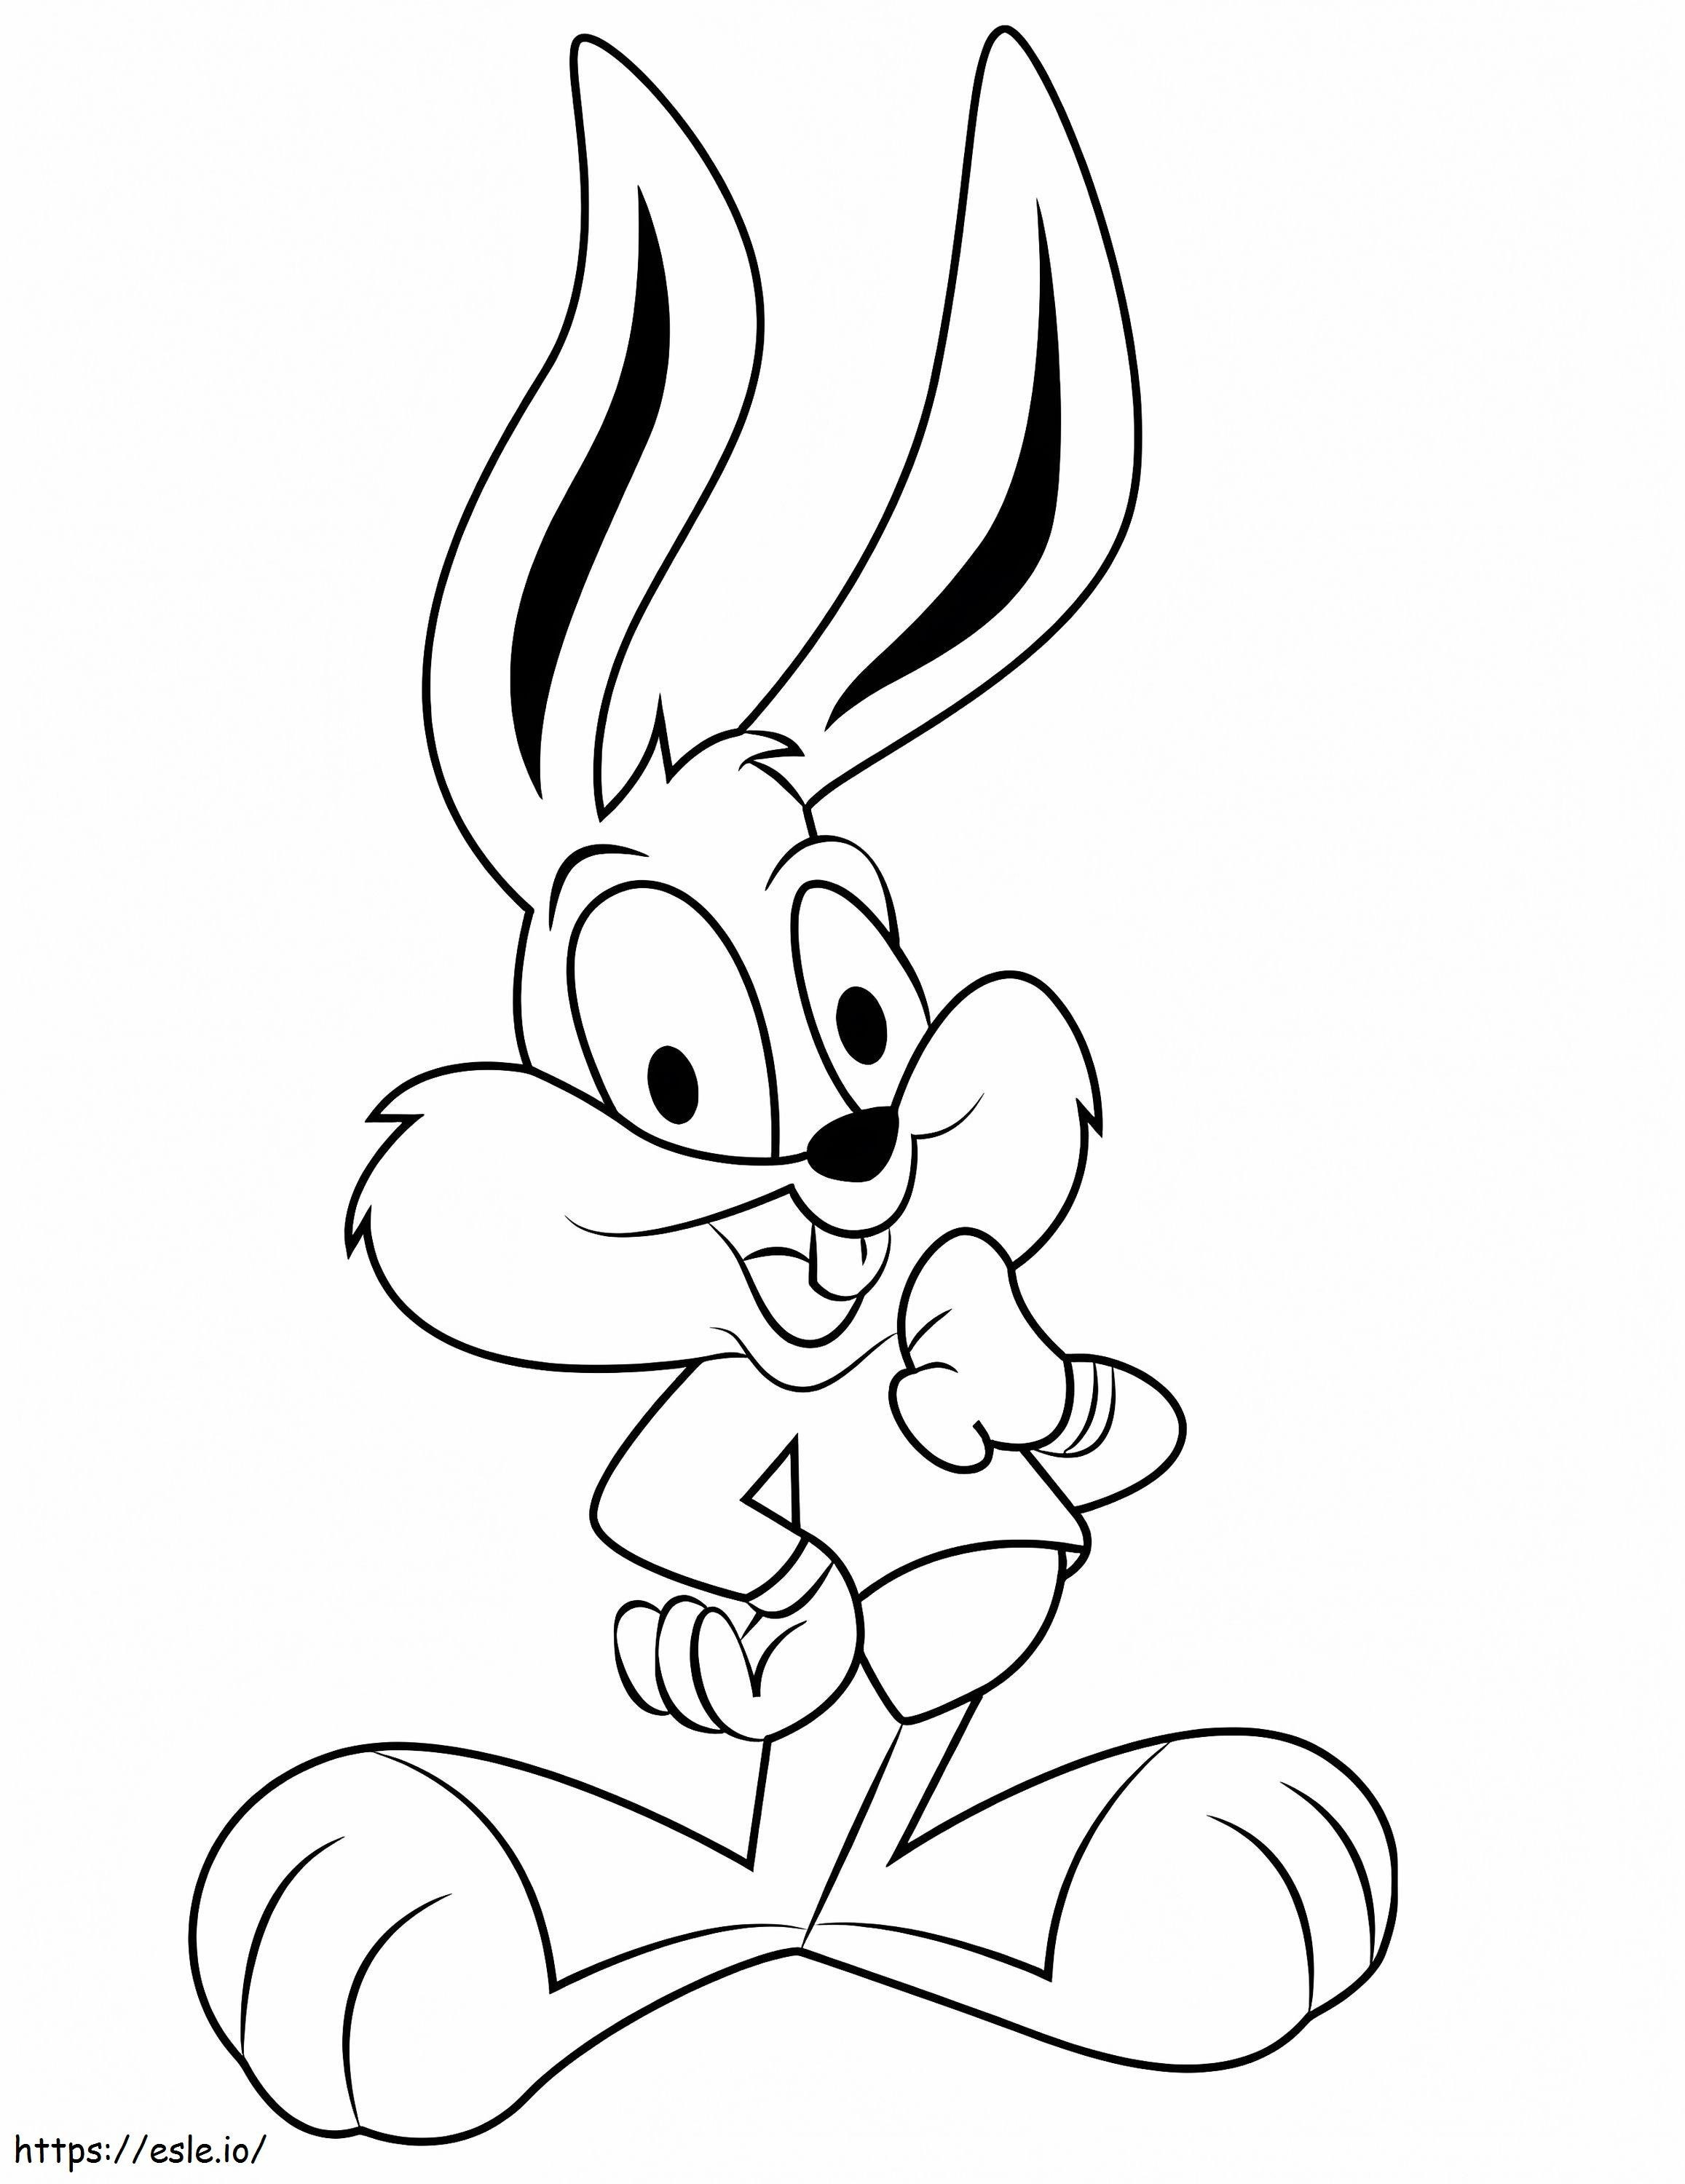 Happy Buster Bunny coloring page